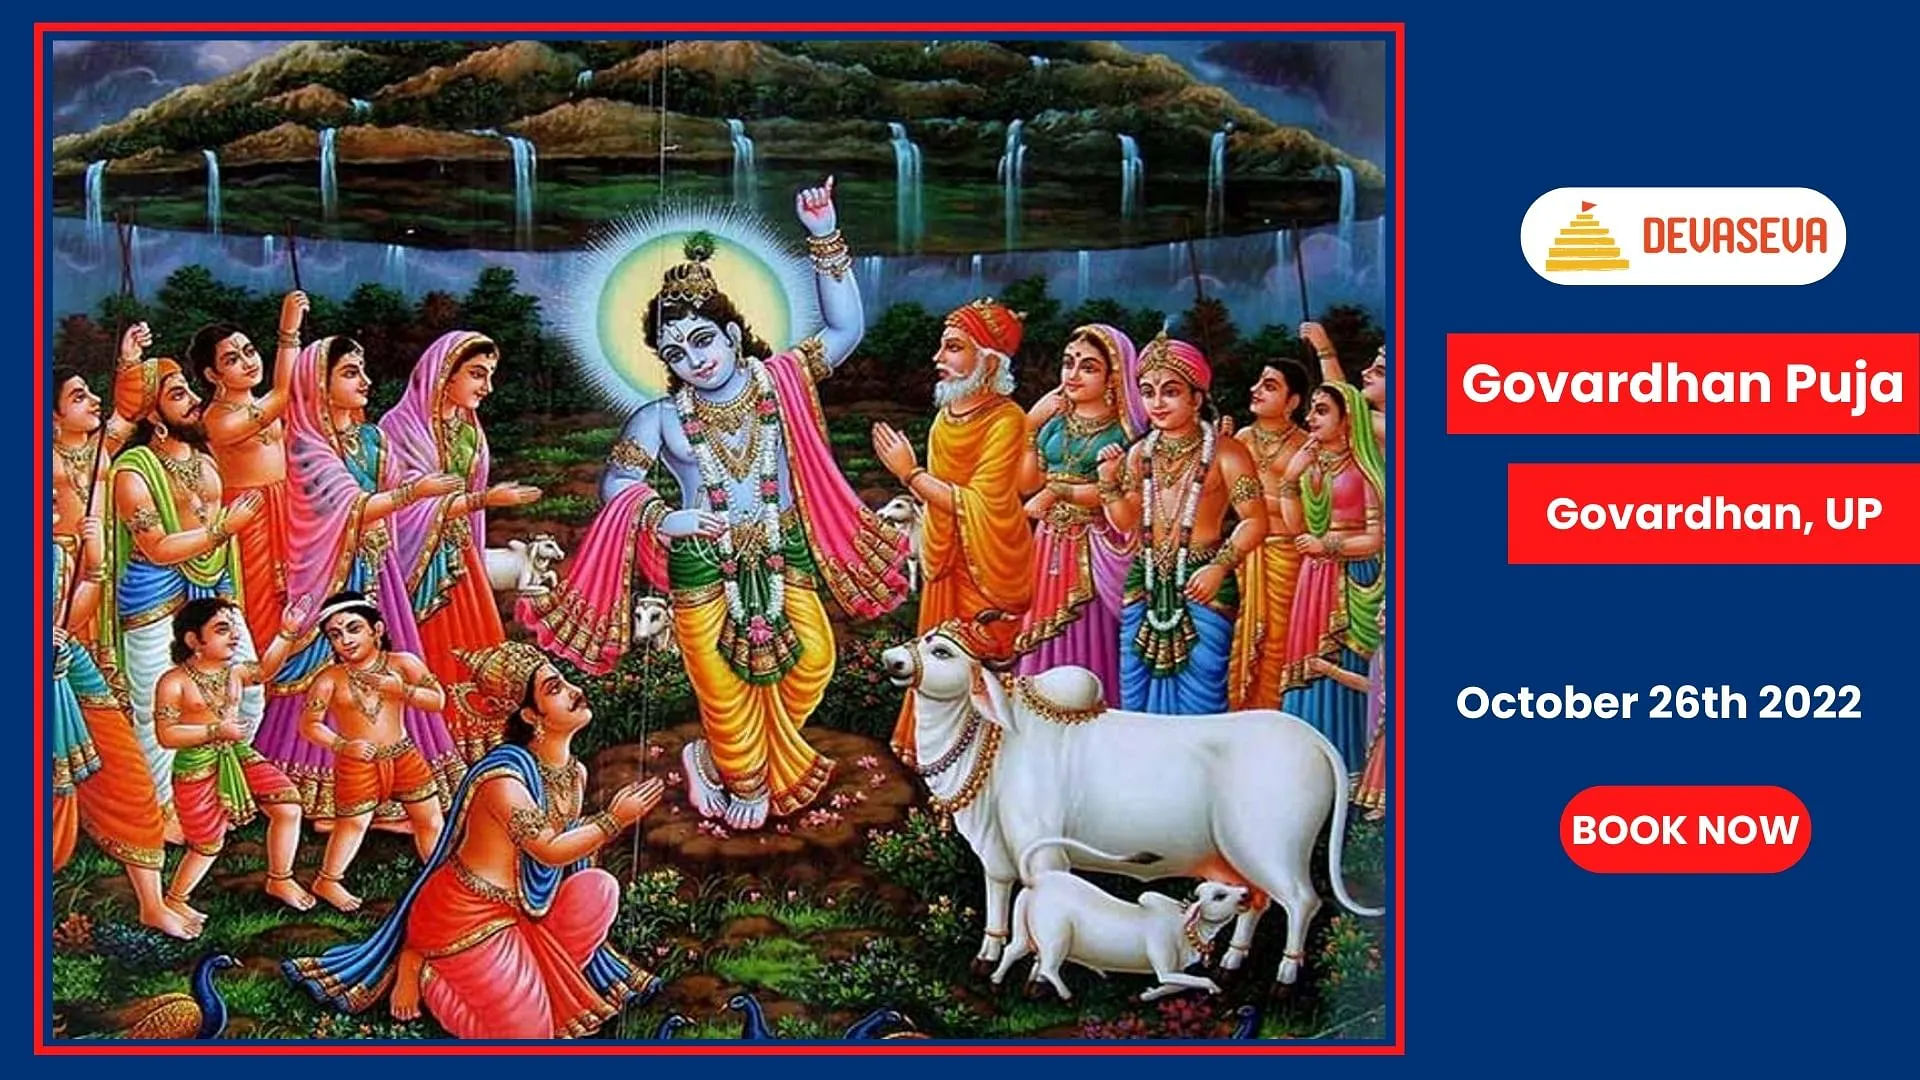 On the occasion of Govardhan Puja, worship Lord Krishna in Govardhan village